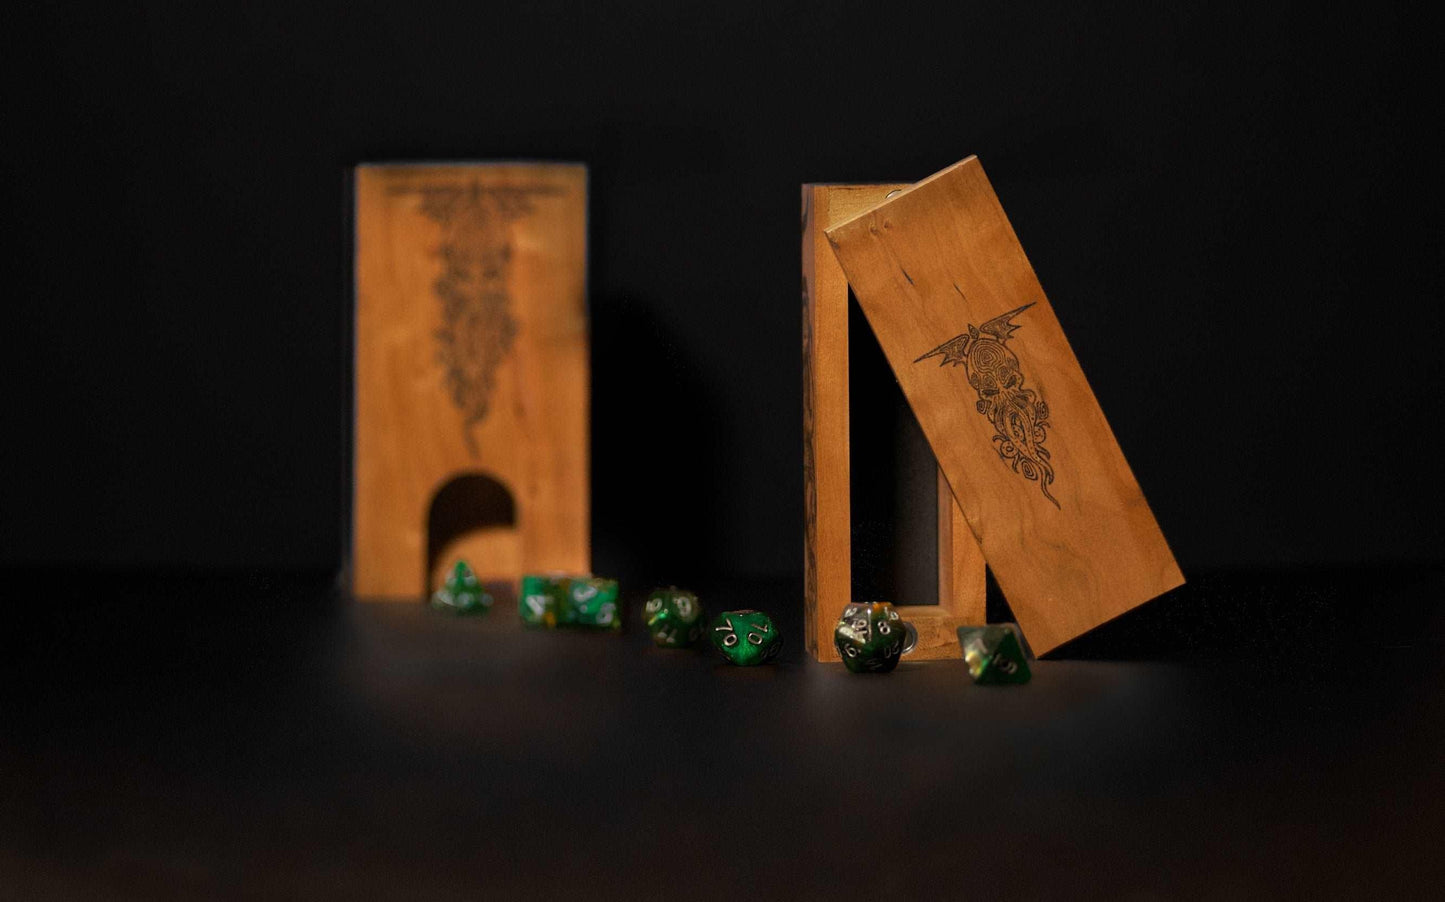 Cherry Dice Vault with Cthulhu - Dragon Armor Games